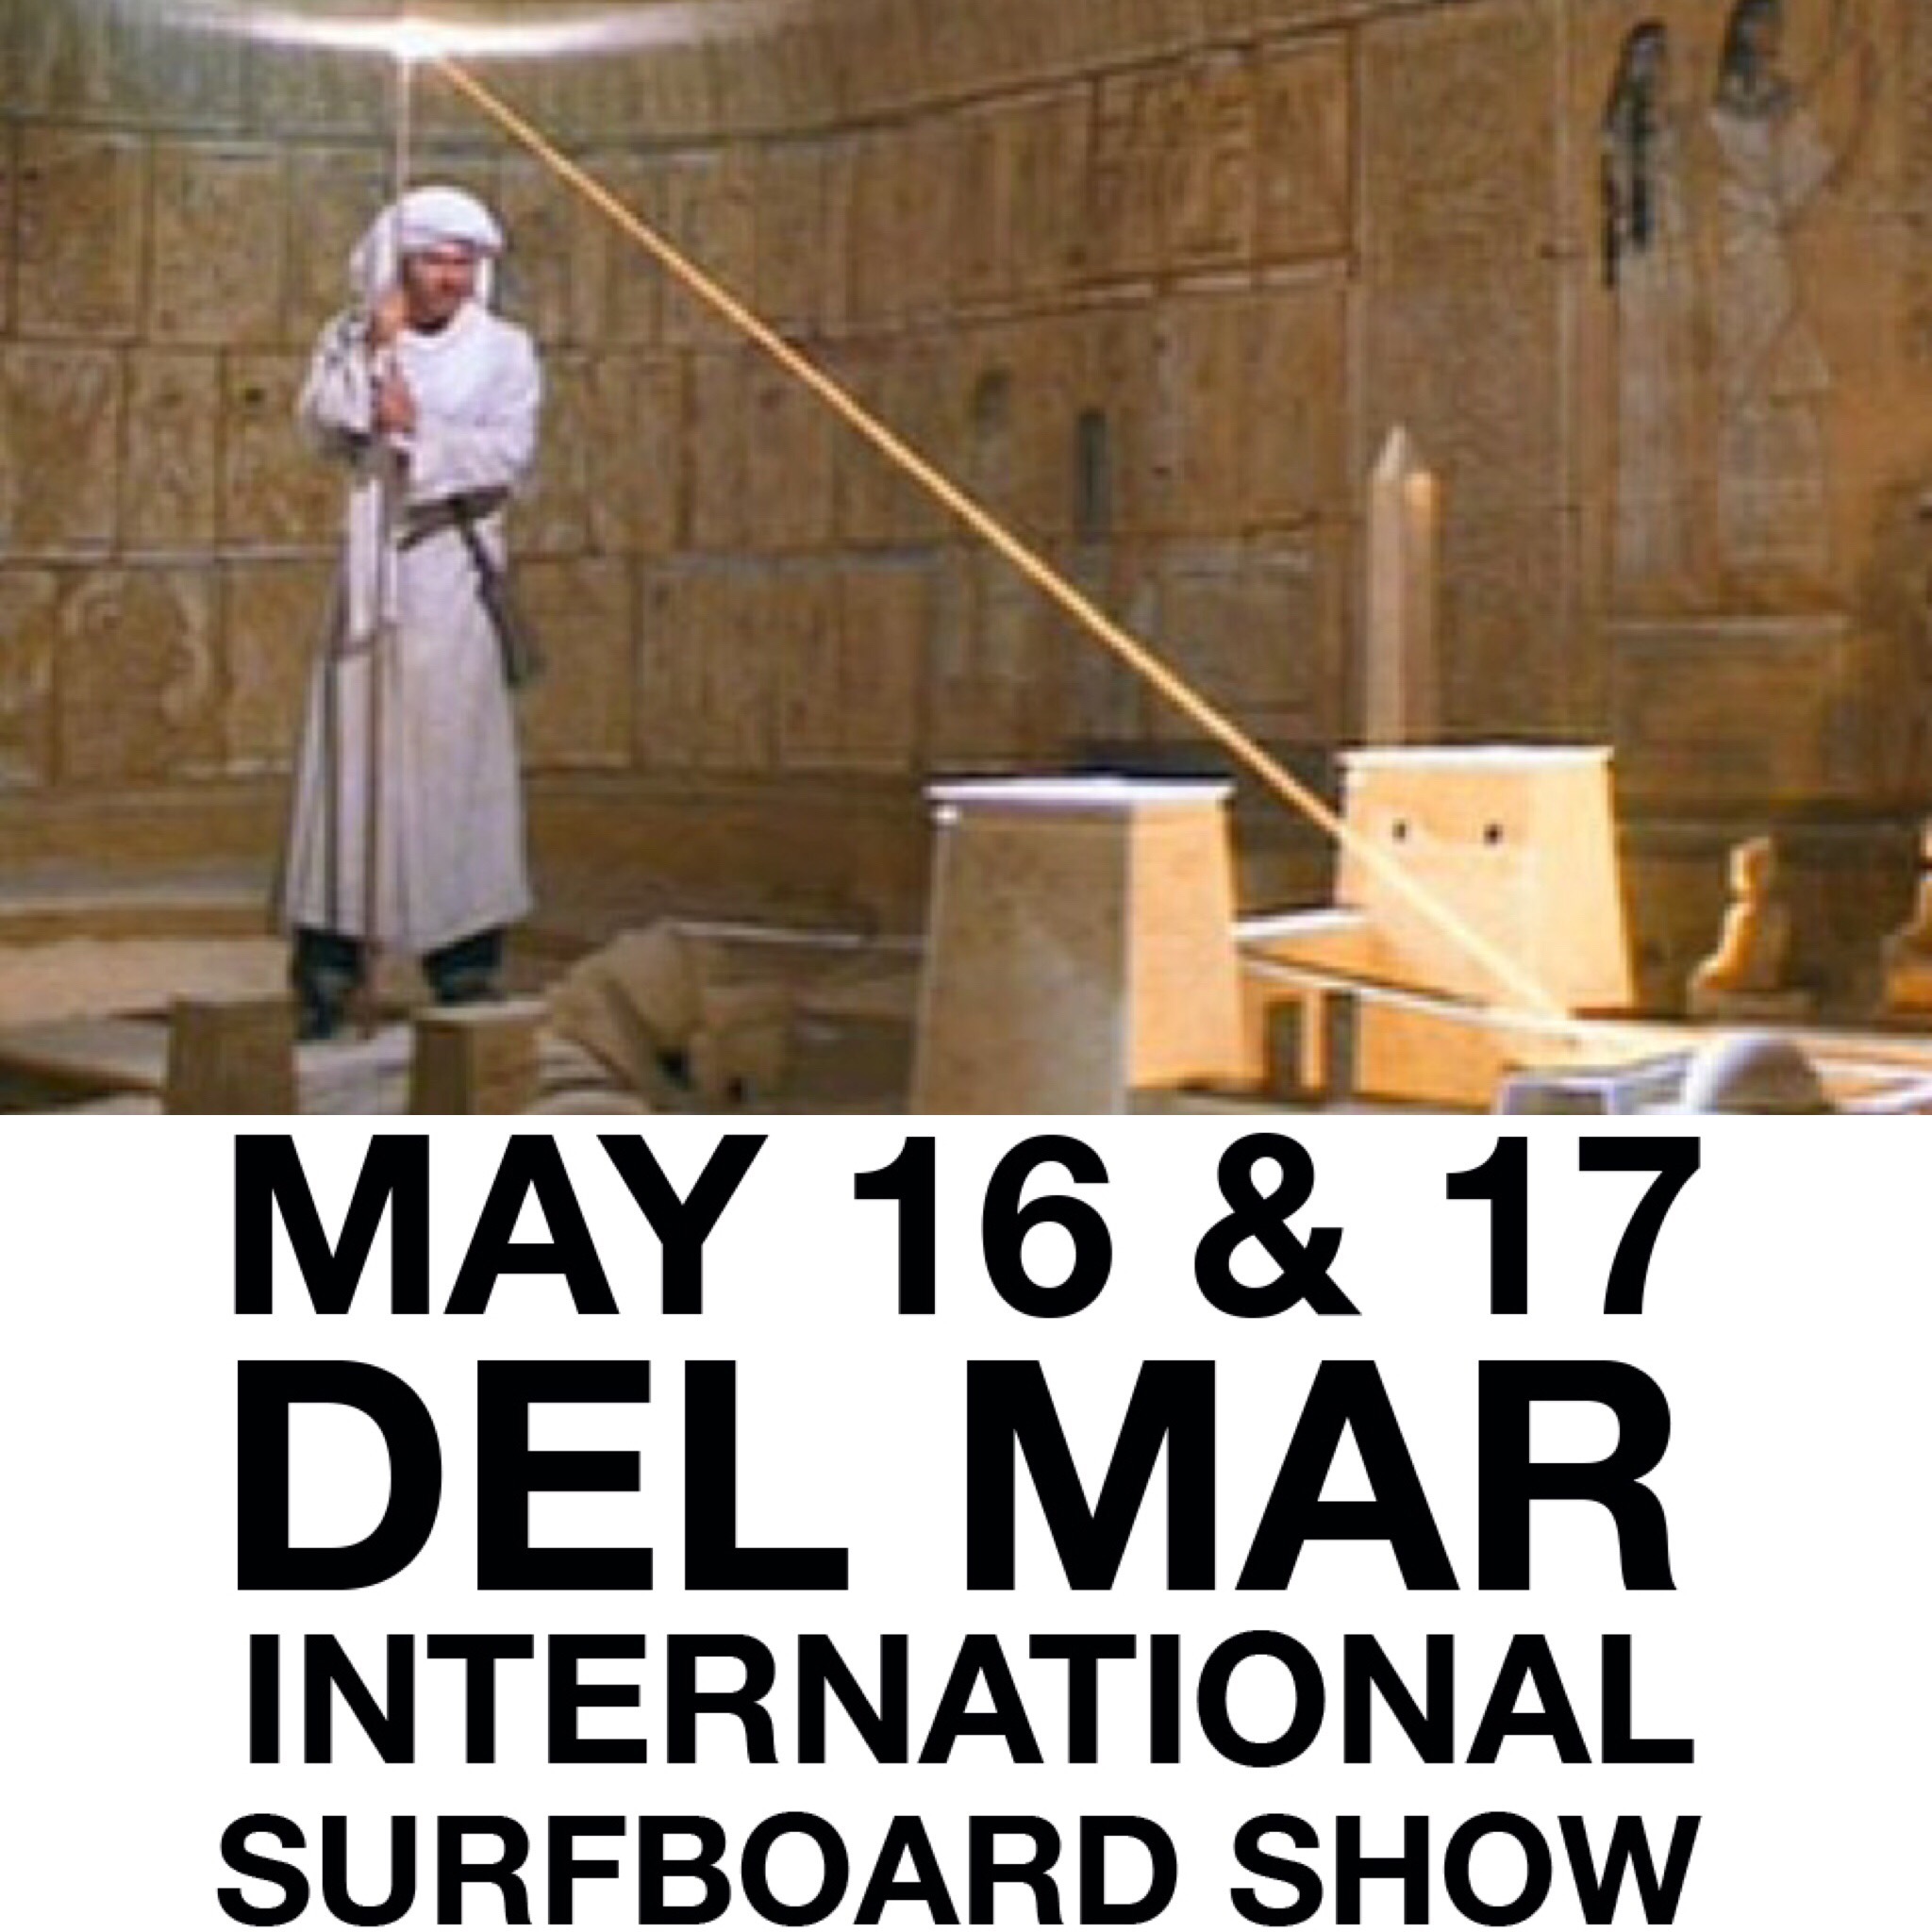 Surfboard Expo Thingy this weekend! 